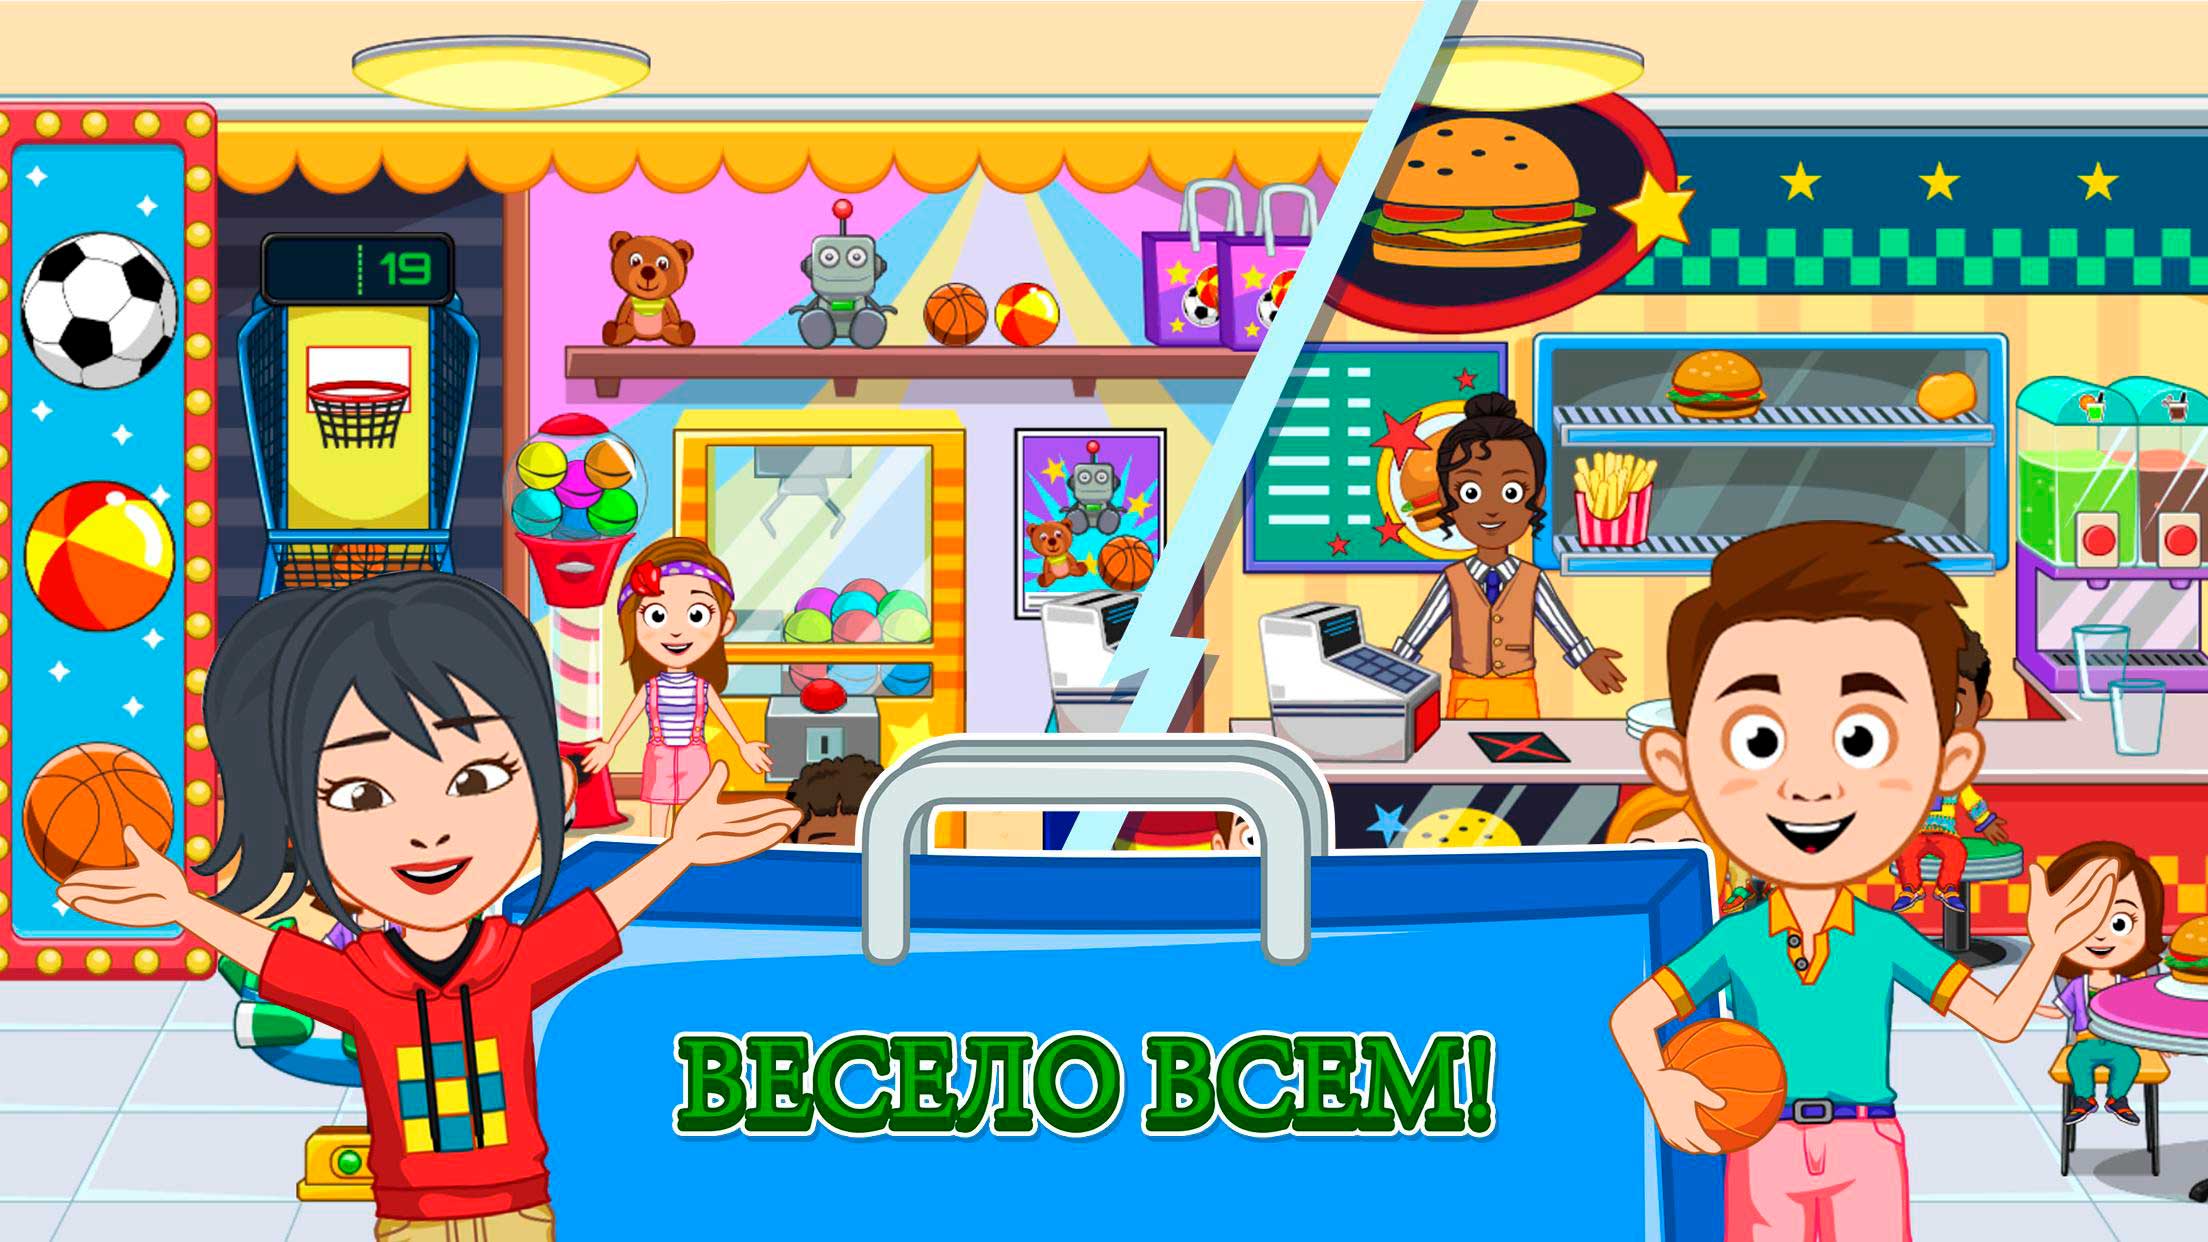 M y game. Игра май Таун. Игра my Town торговый центр. My Town торговый Пассаж. Игра my Town Play discover.